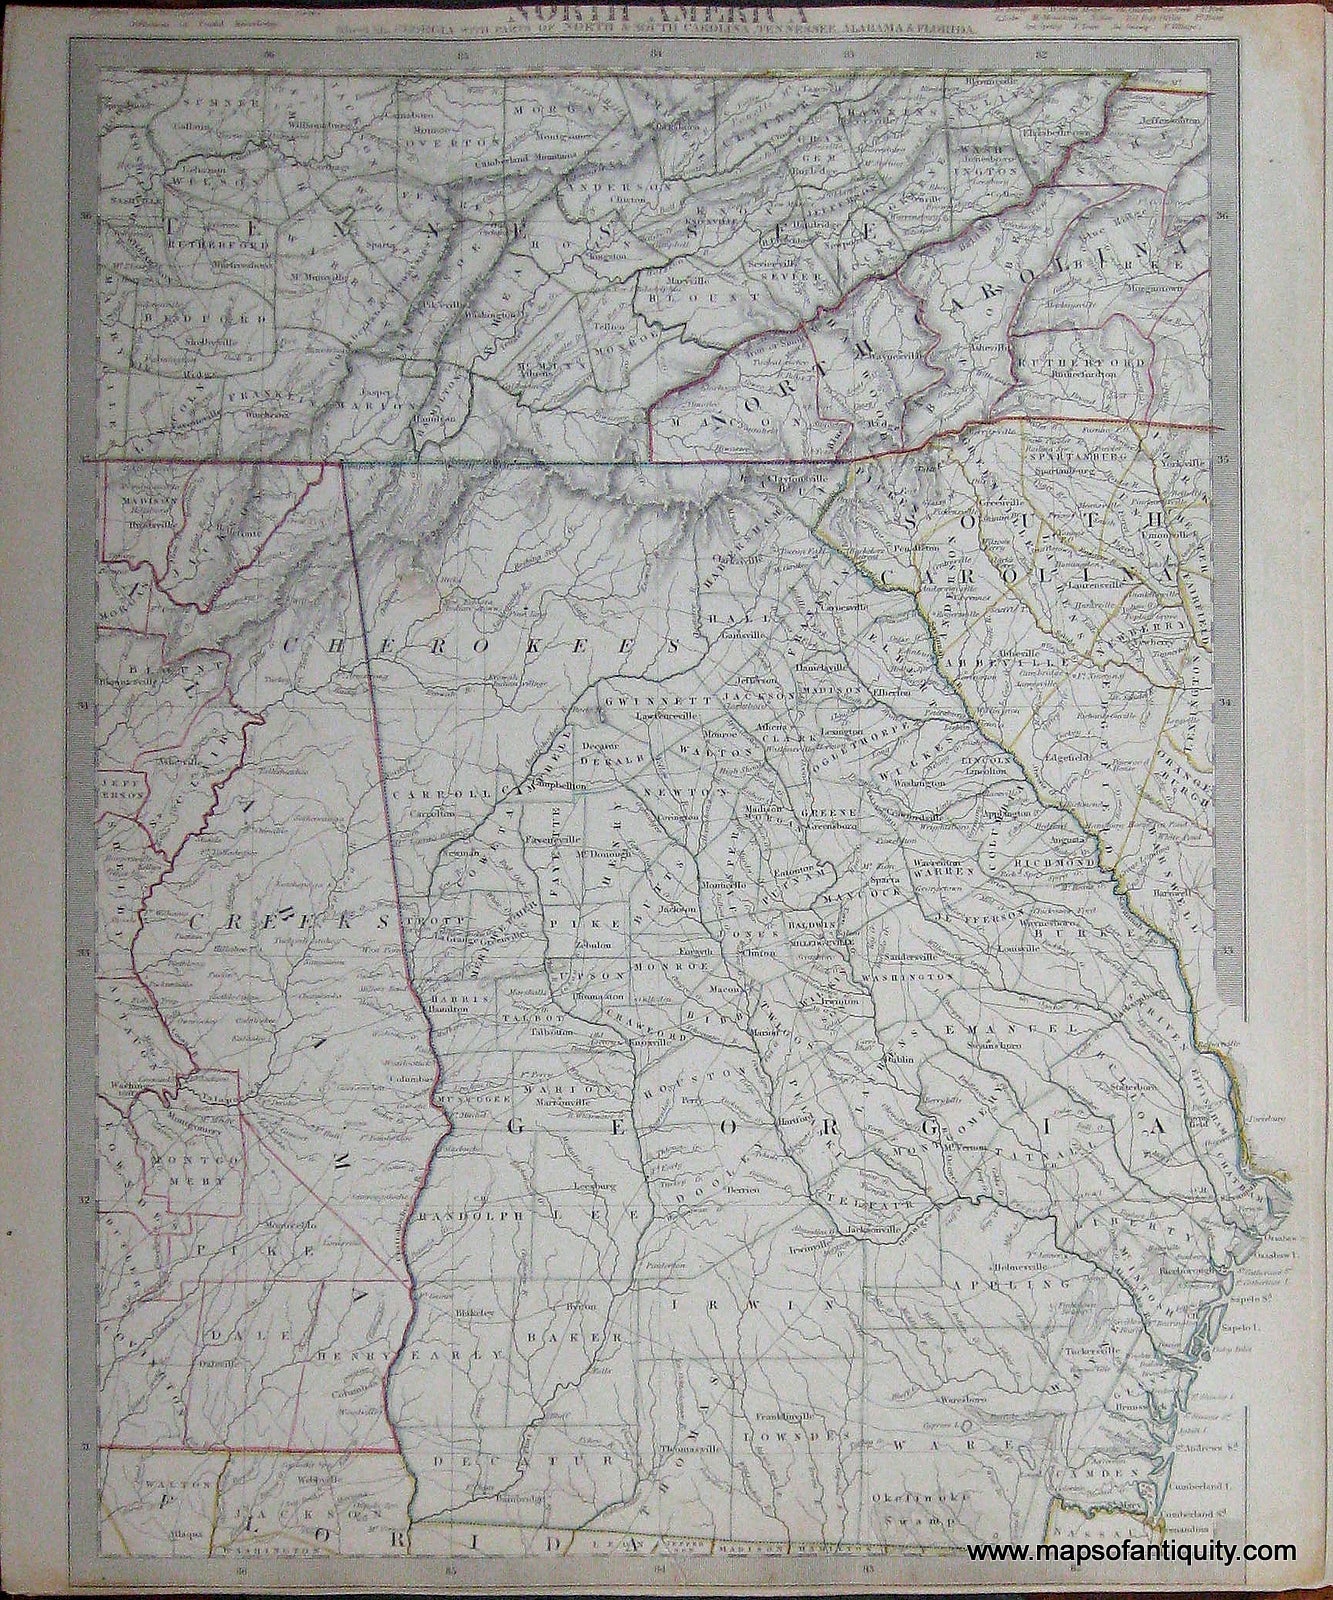 Antique-Hand-Colored-Map-North-America-Sheet-XII-Georgia-with-parts-of-North-&-South-Carolina-Tennessee-Alabama-&-Florida.**********-United-States-South-1840/1844-SDUK/Society-for-the-Diffusion-of-Useful-Knowledge-Maps-Of-Antiquity